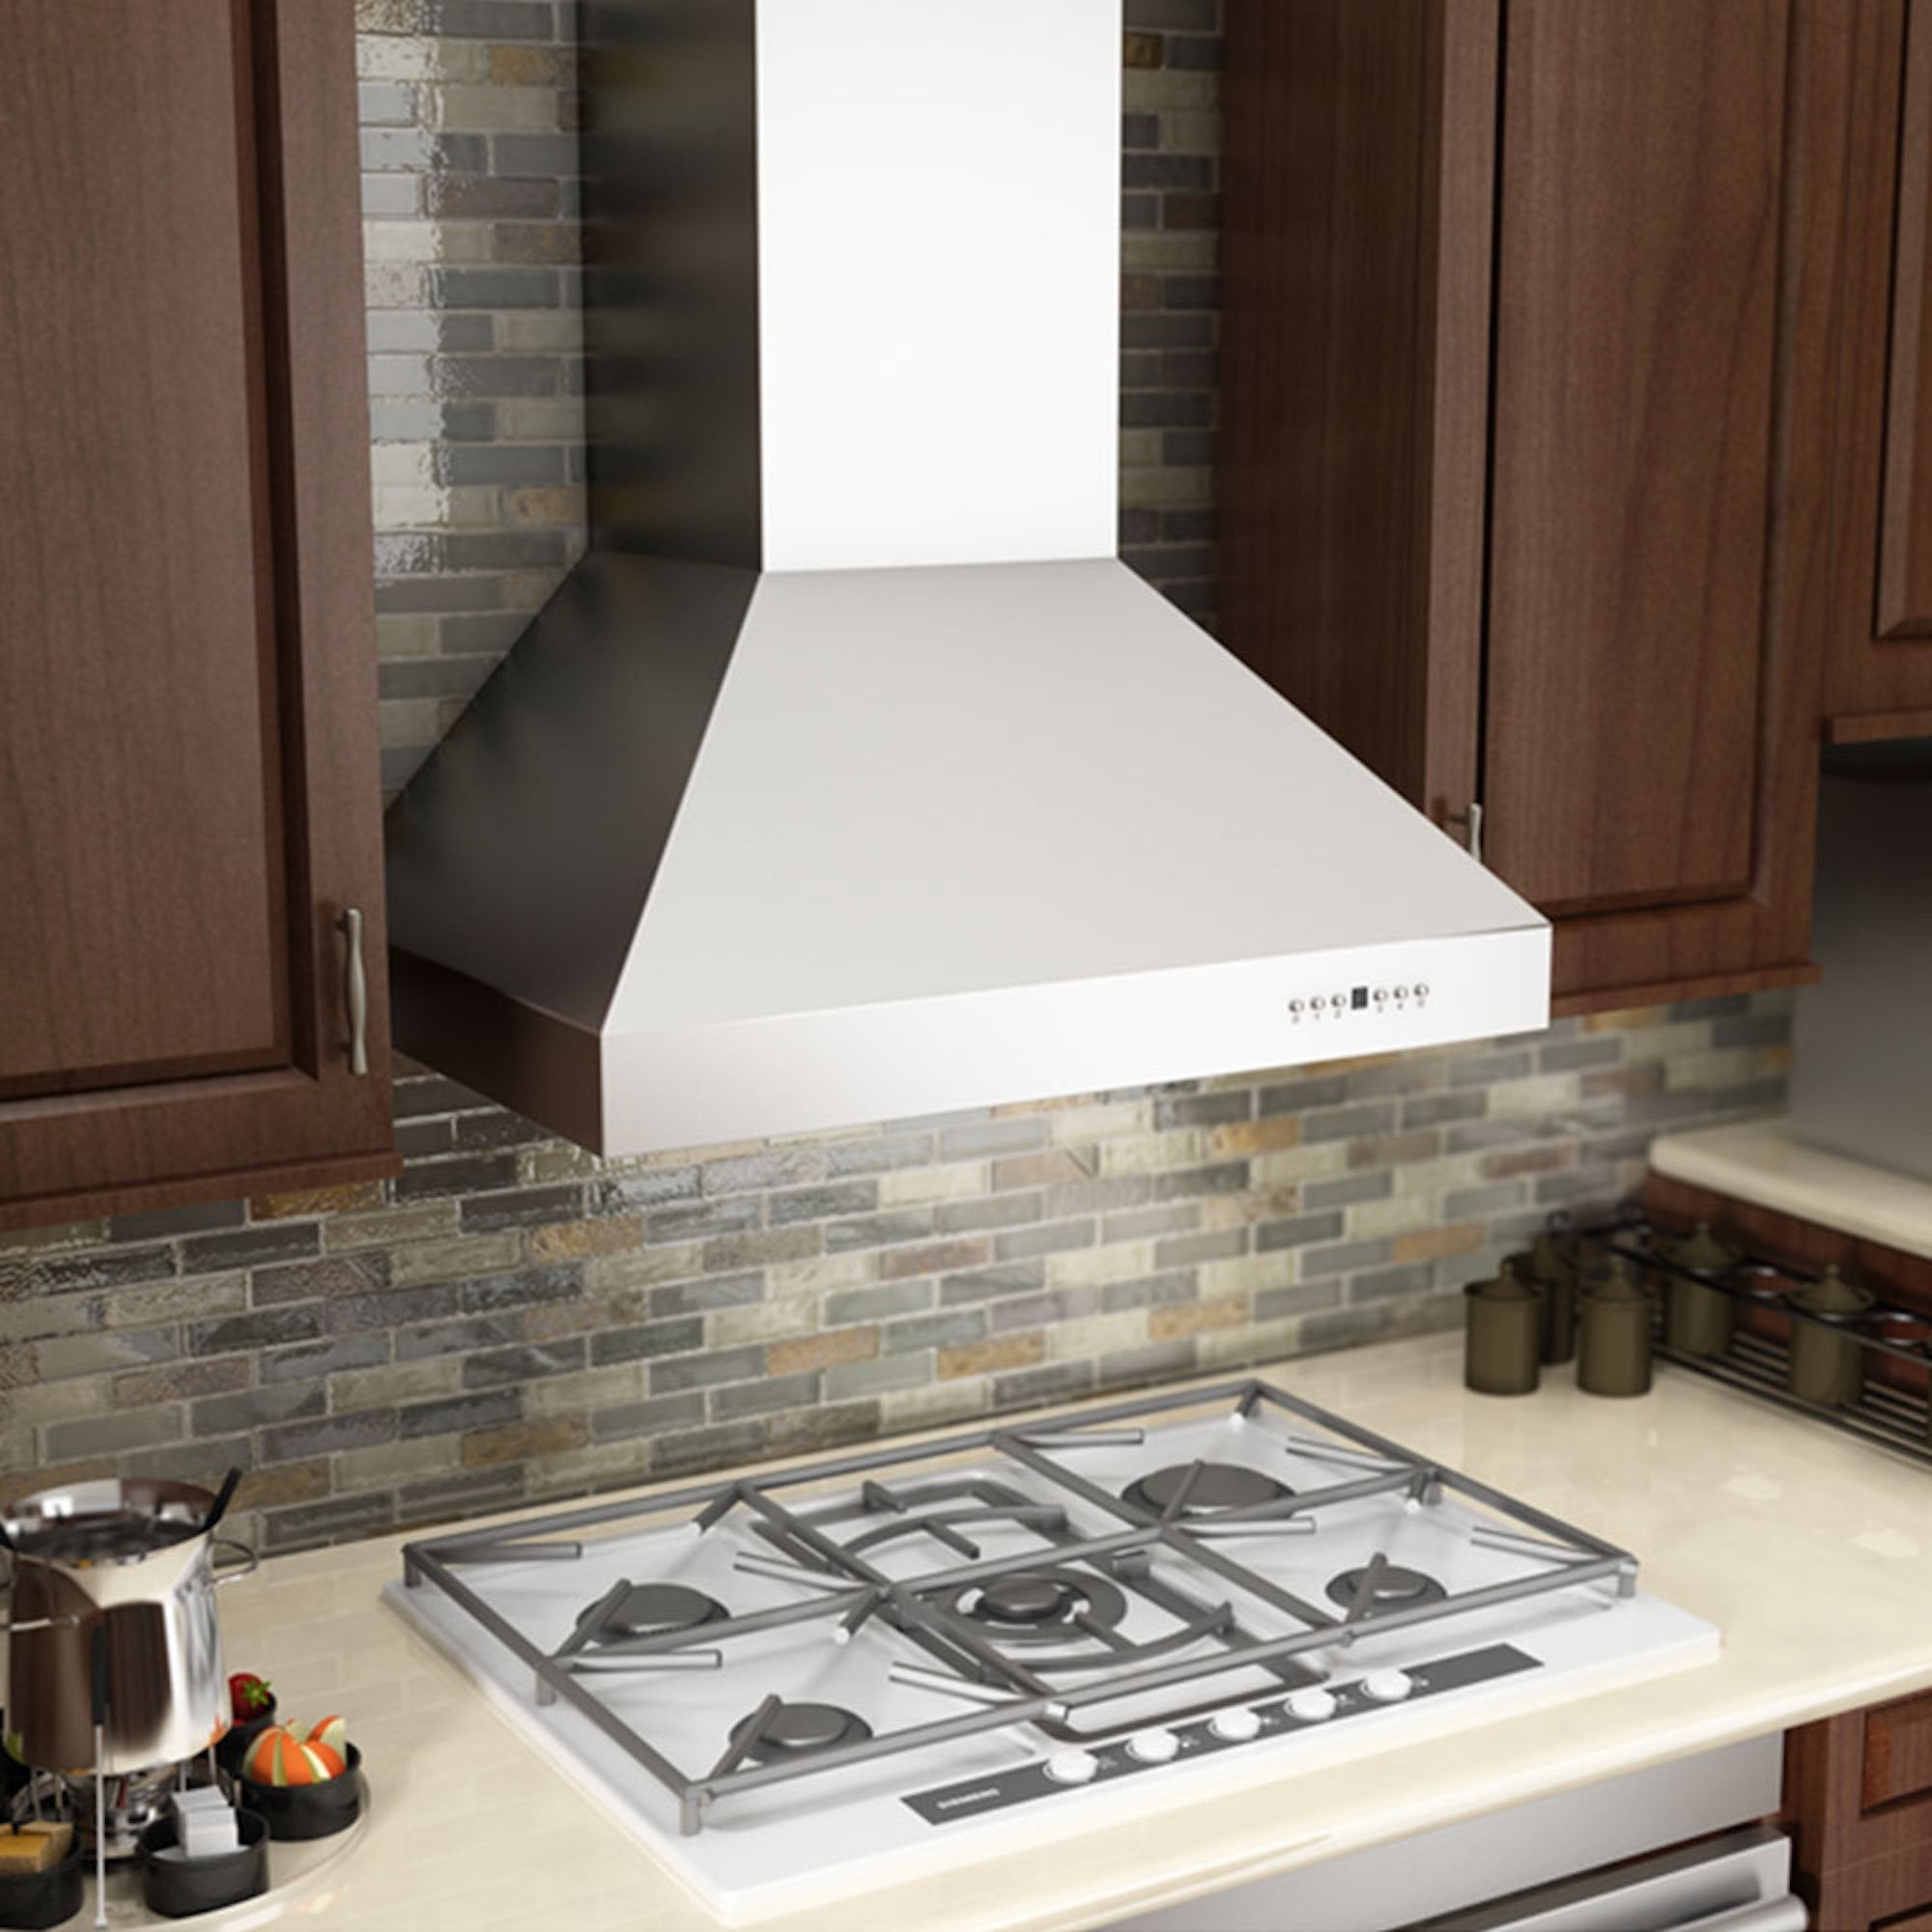 ZLINE Professional Ducted Wall Mount Range Hood rendering in a kitchen from above.